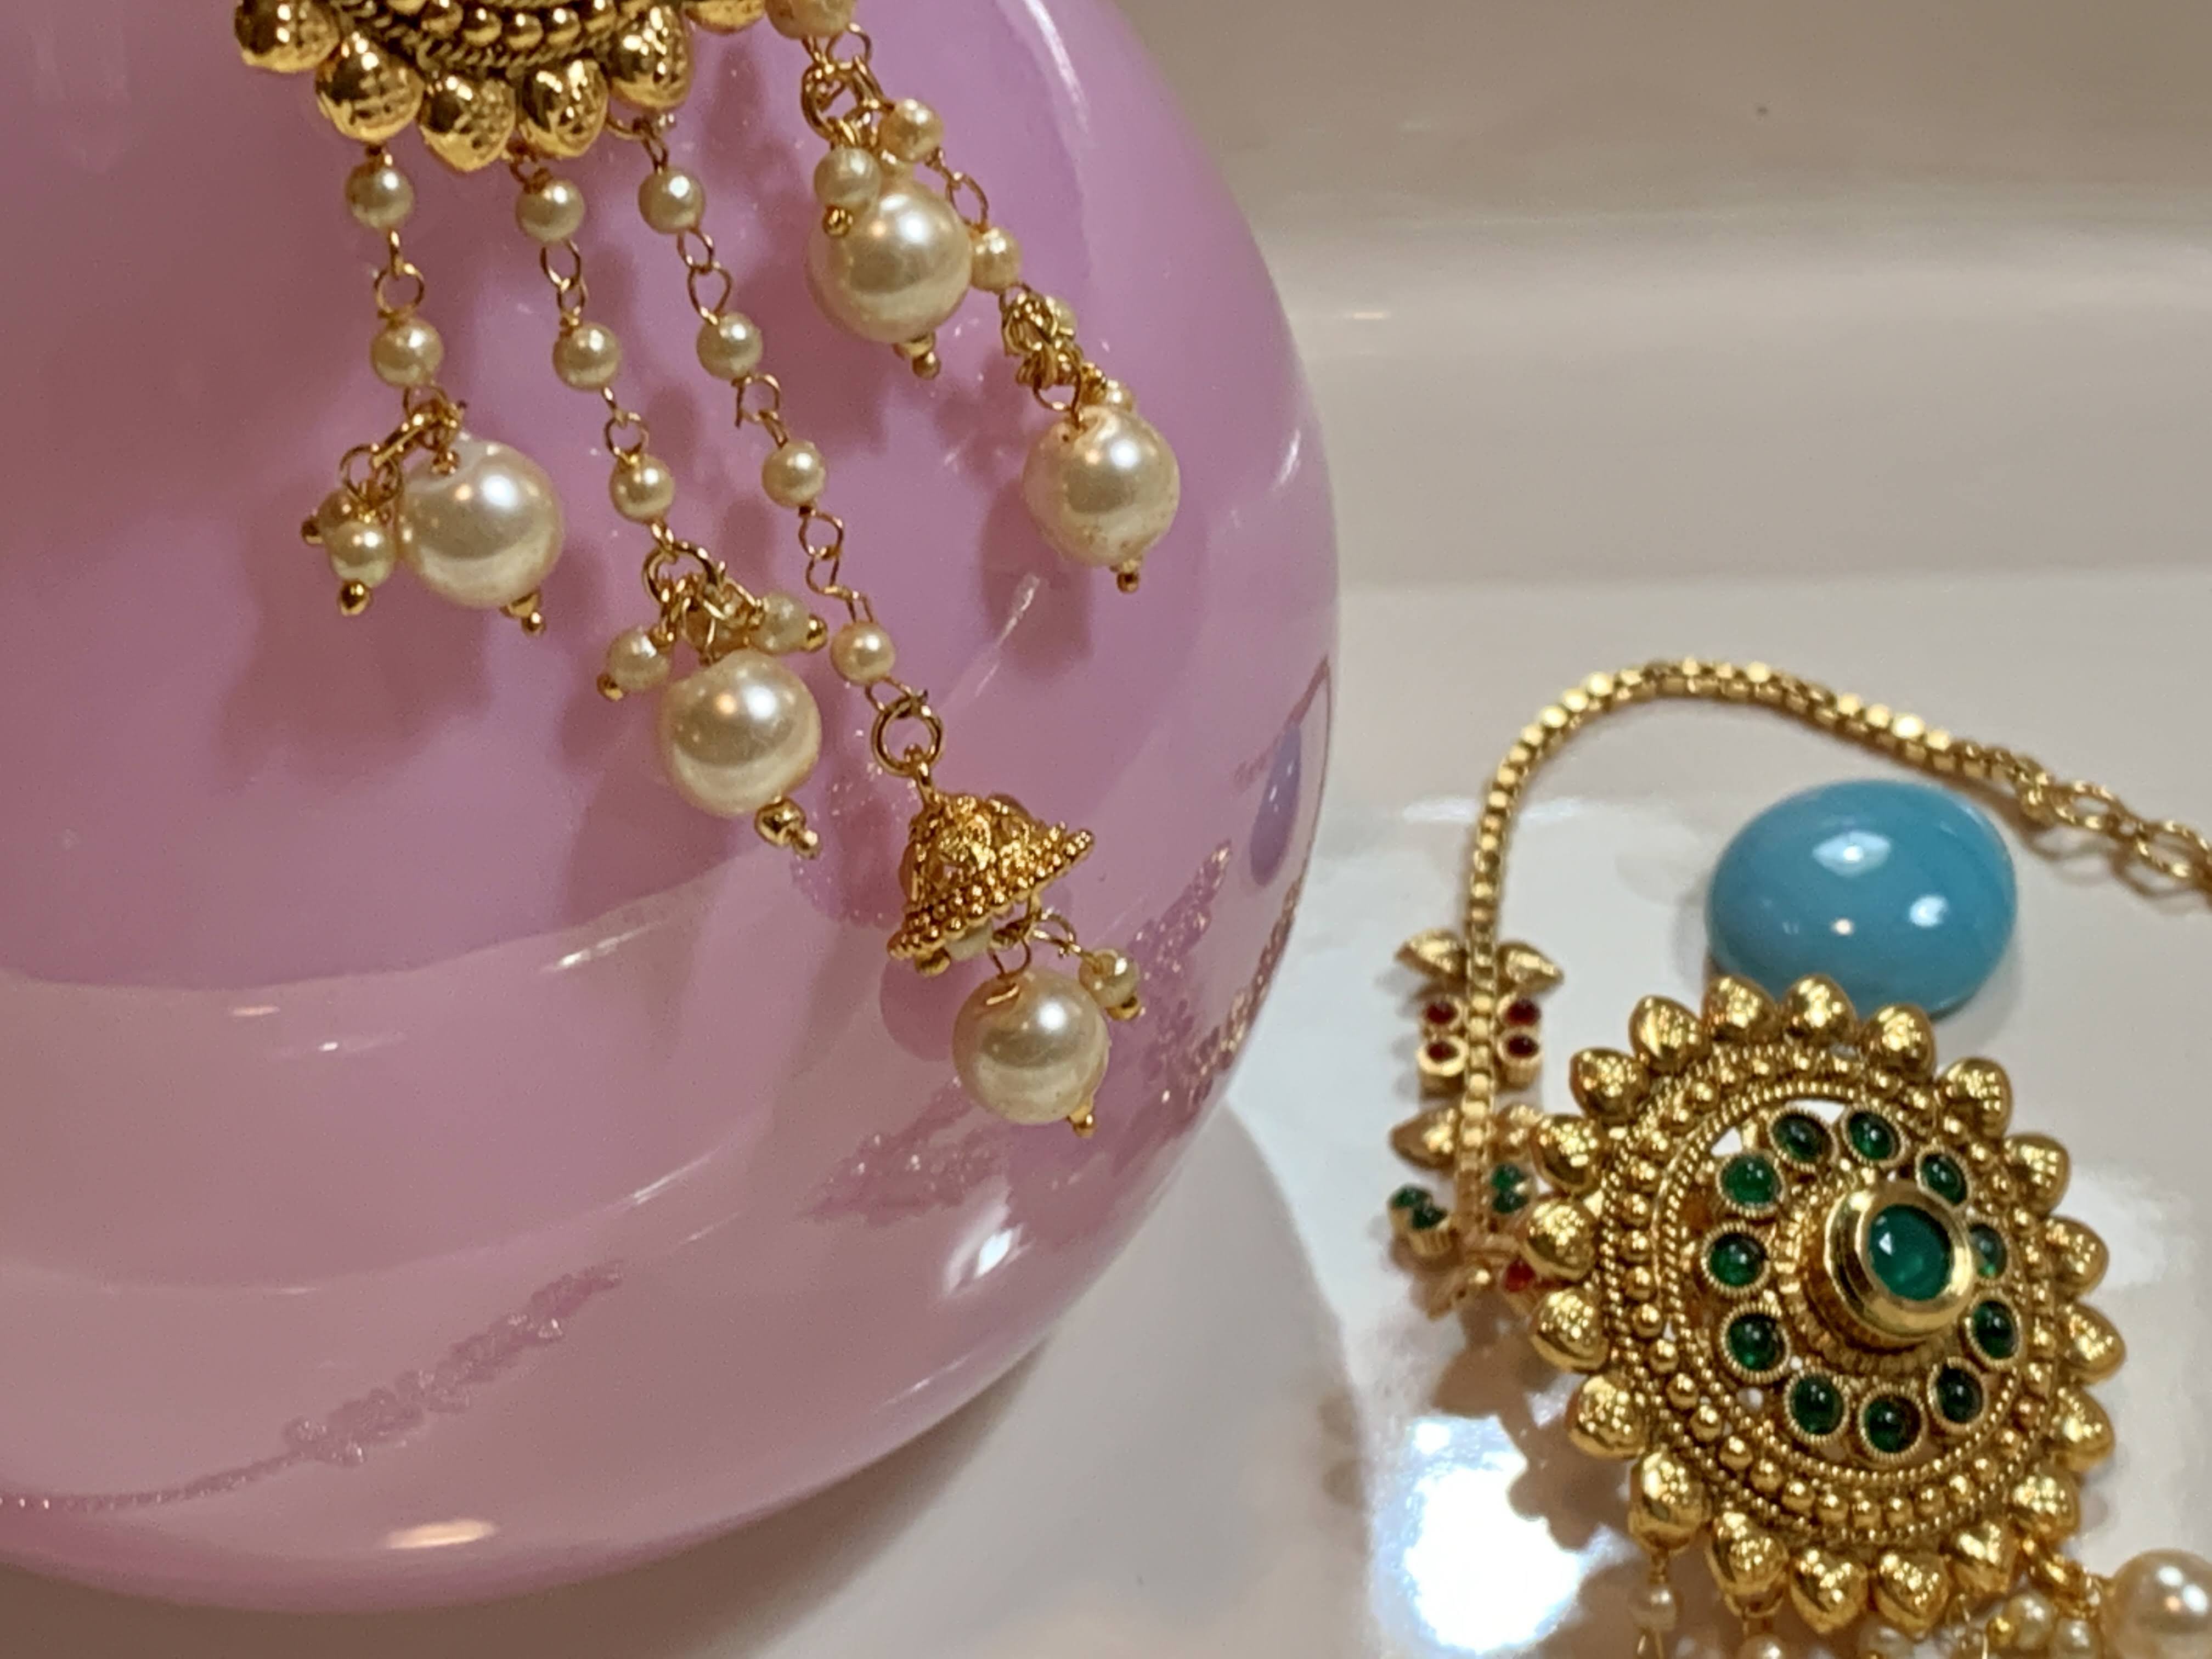 Gold Plated Jhumki Earrings - Temple Jewelry - Kemp Stone and Pearl Beads Studded